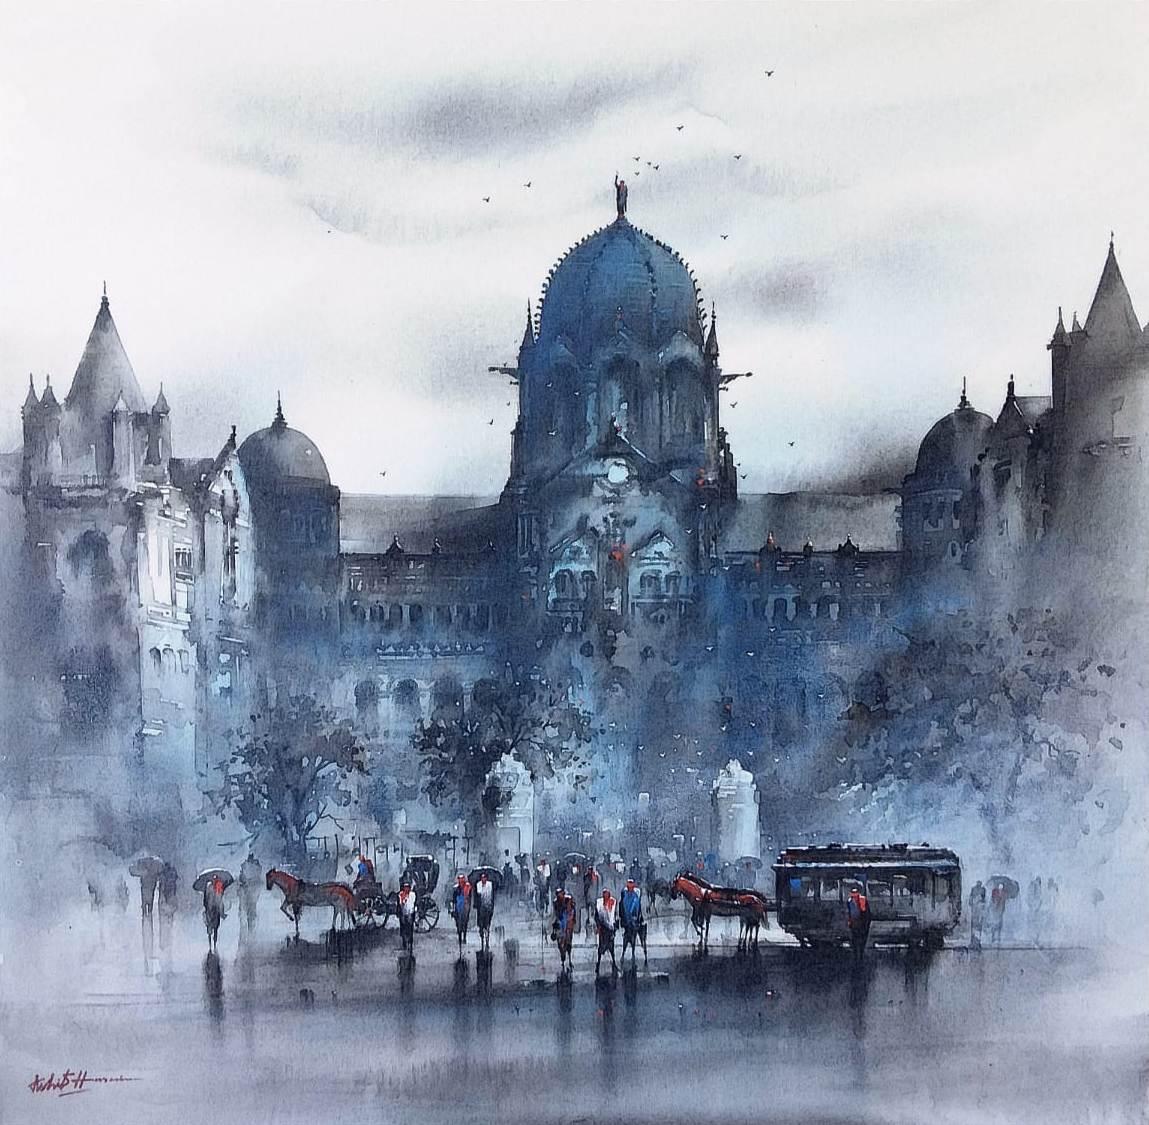 Asif Hussain Figurative Painting - Banaras Ghat, Acrylic on Canvas, Black, Grey by Contemporary Artist "In Stock"